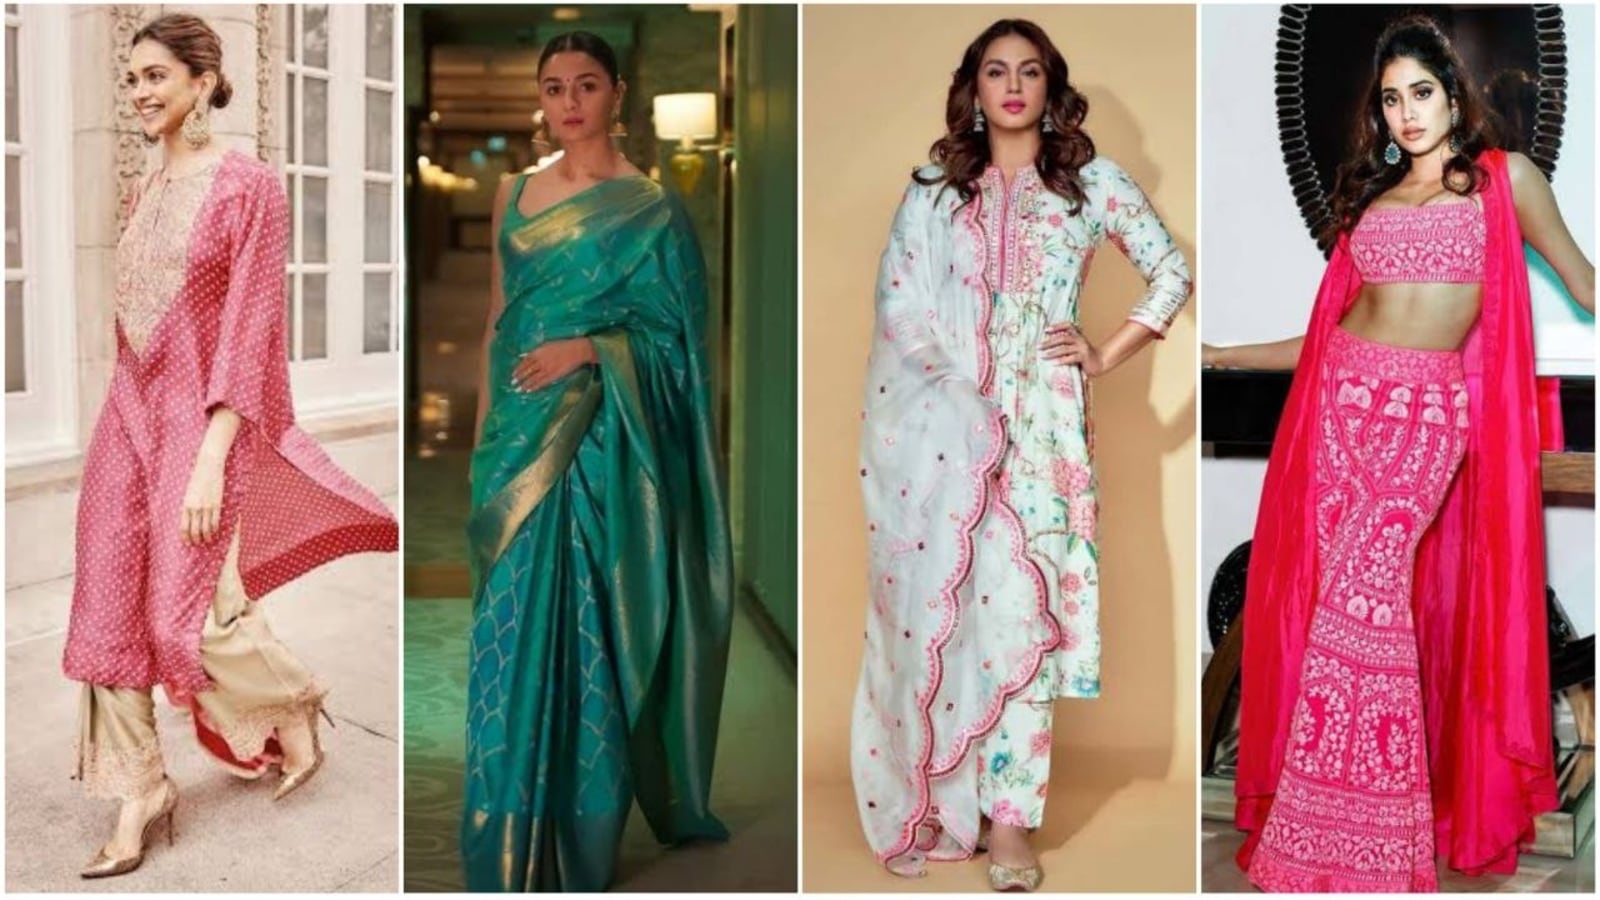 7 Tips to Look Slim in a Sari and Rock Your Next Party Look!